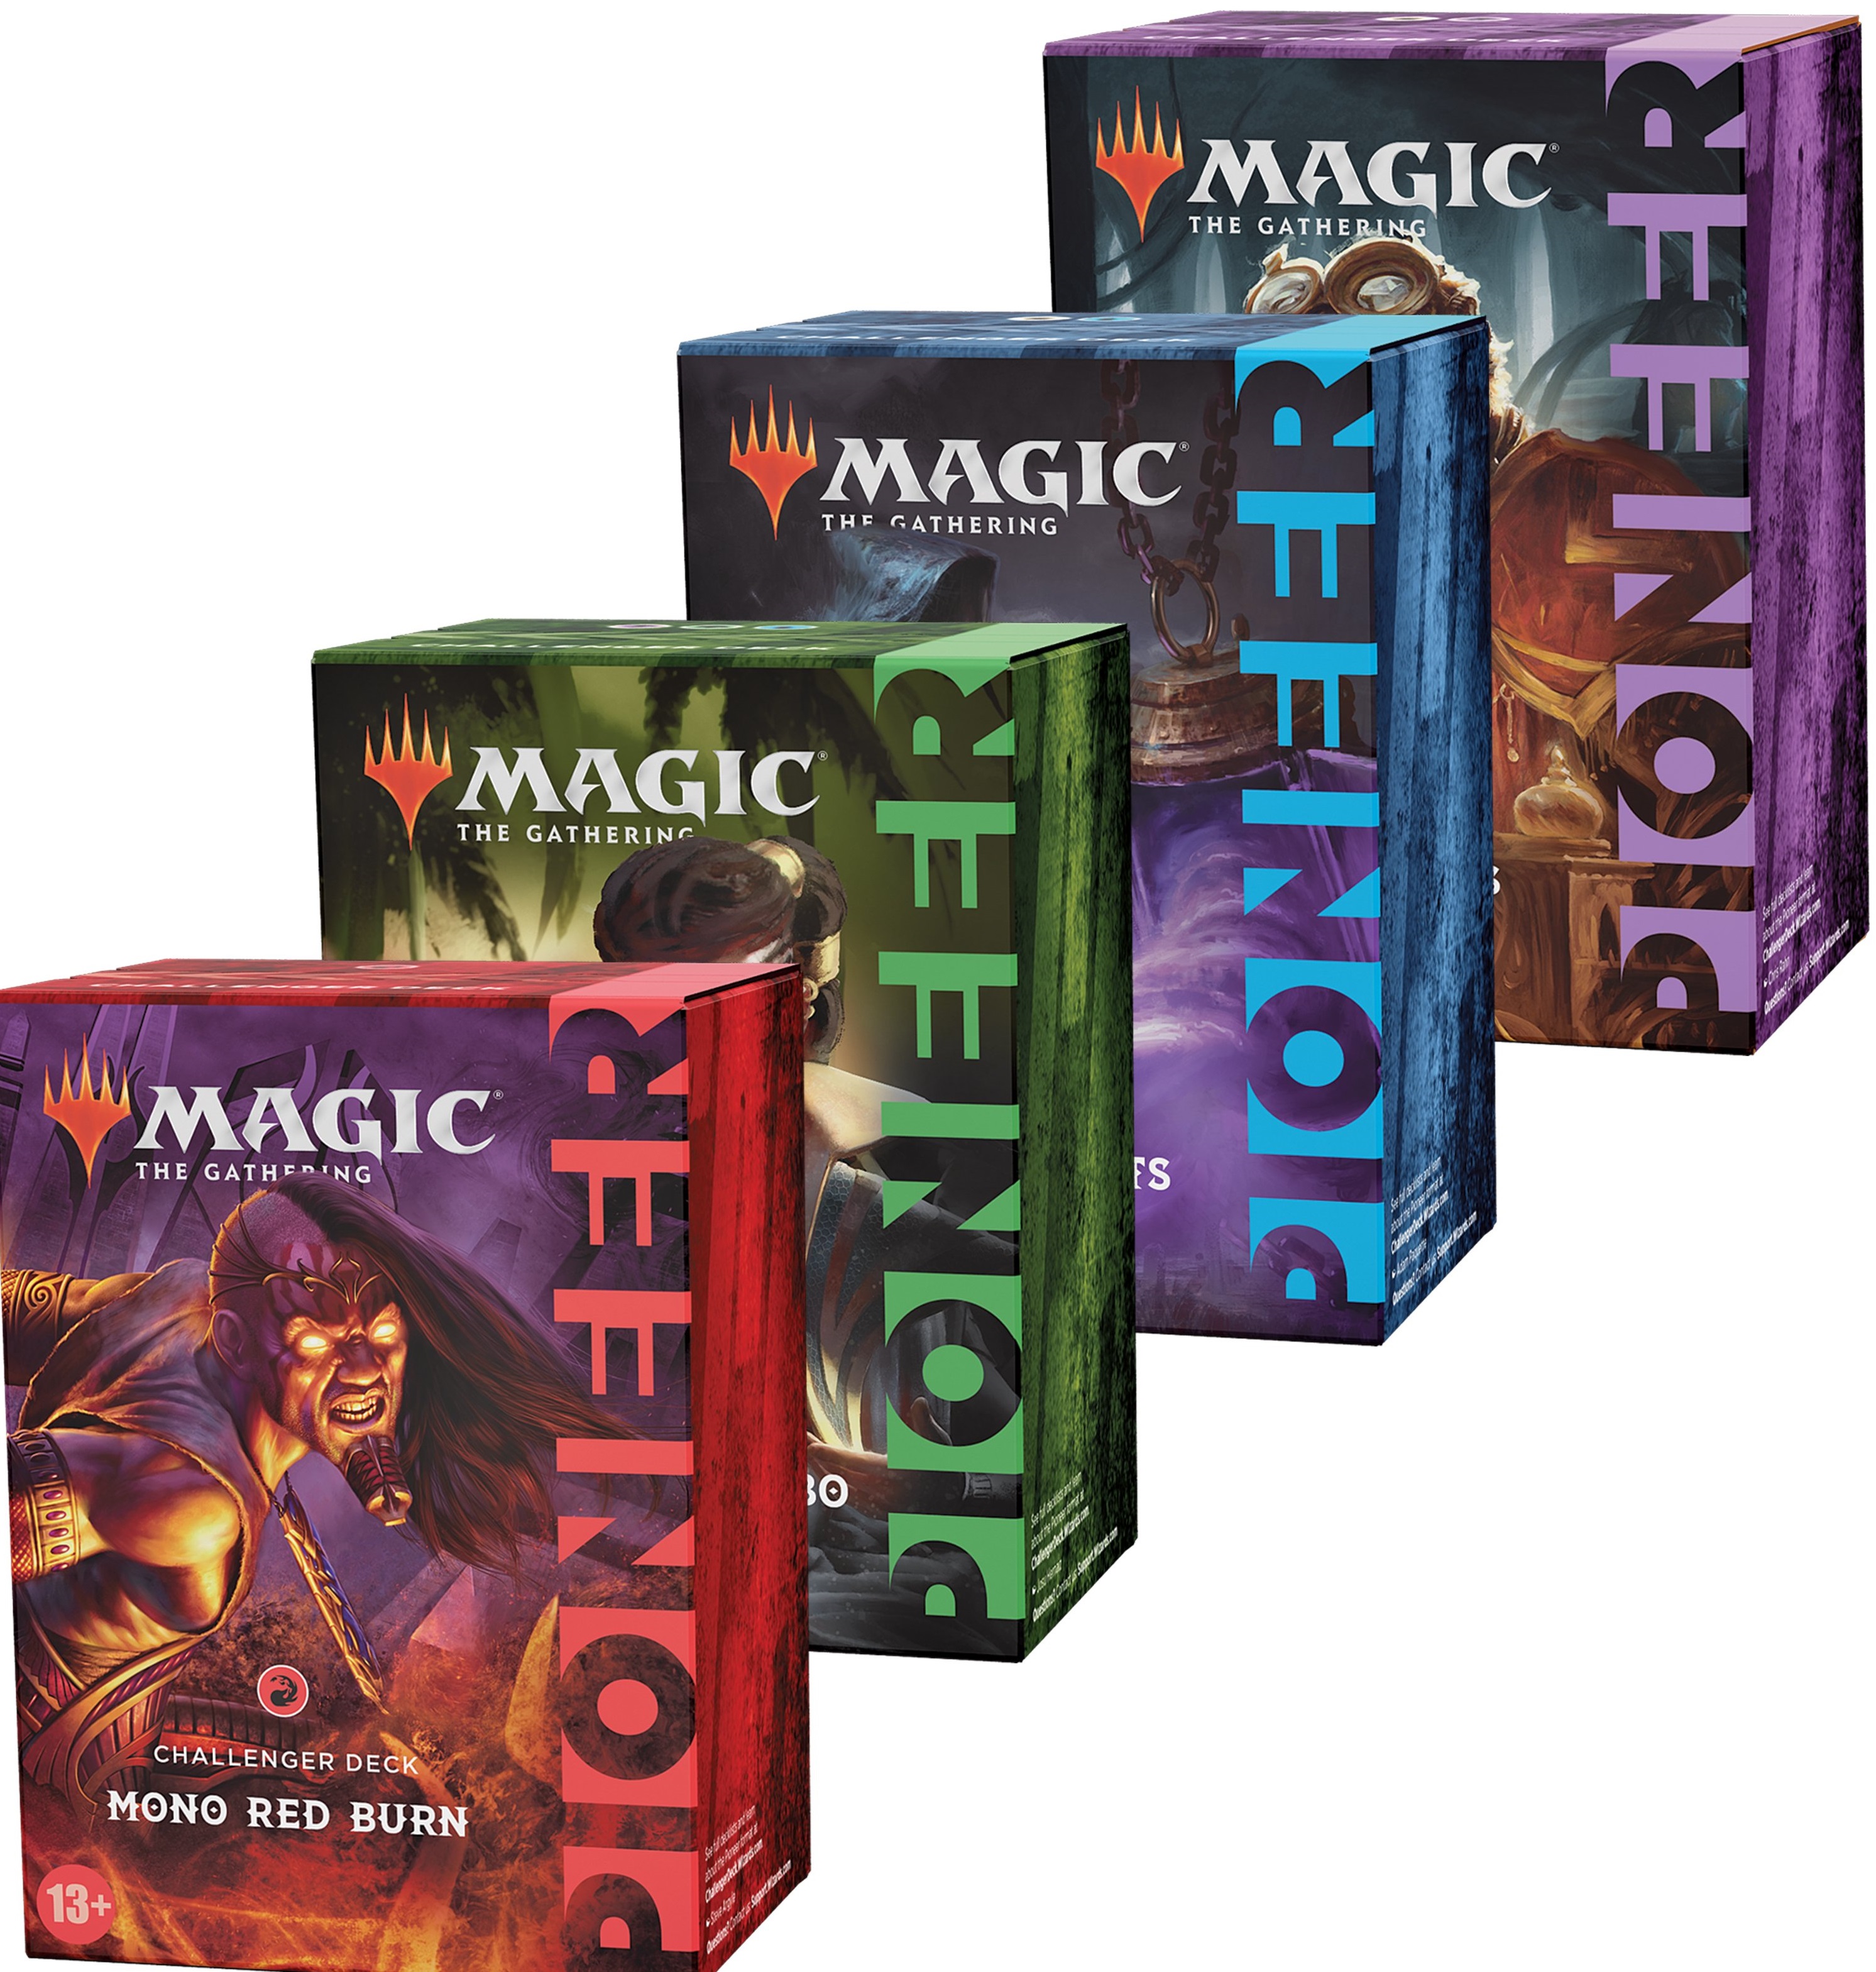 Is It Worth It To Buy A Pioneer Challenger Deck? A Magic: The